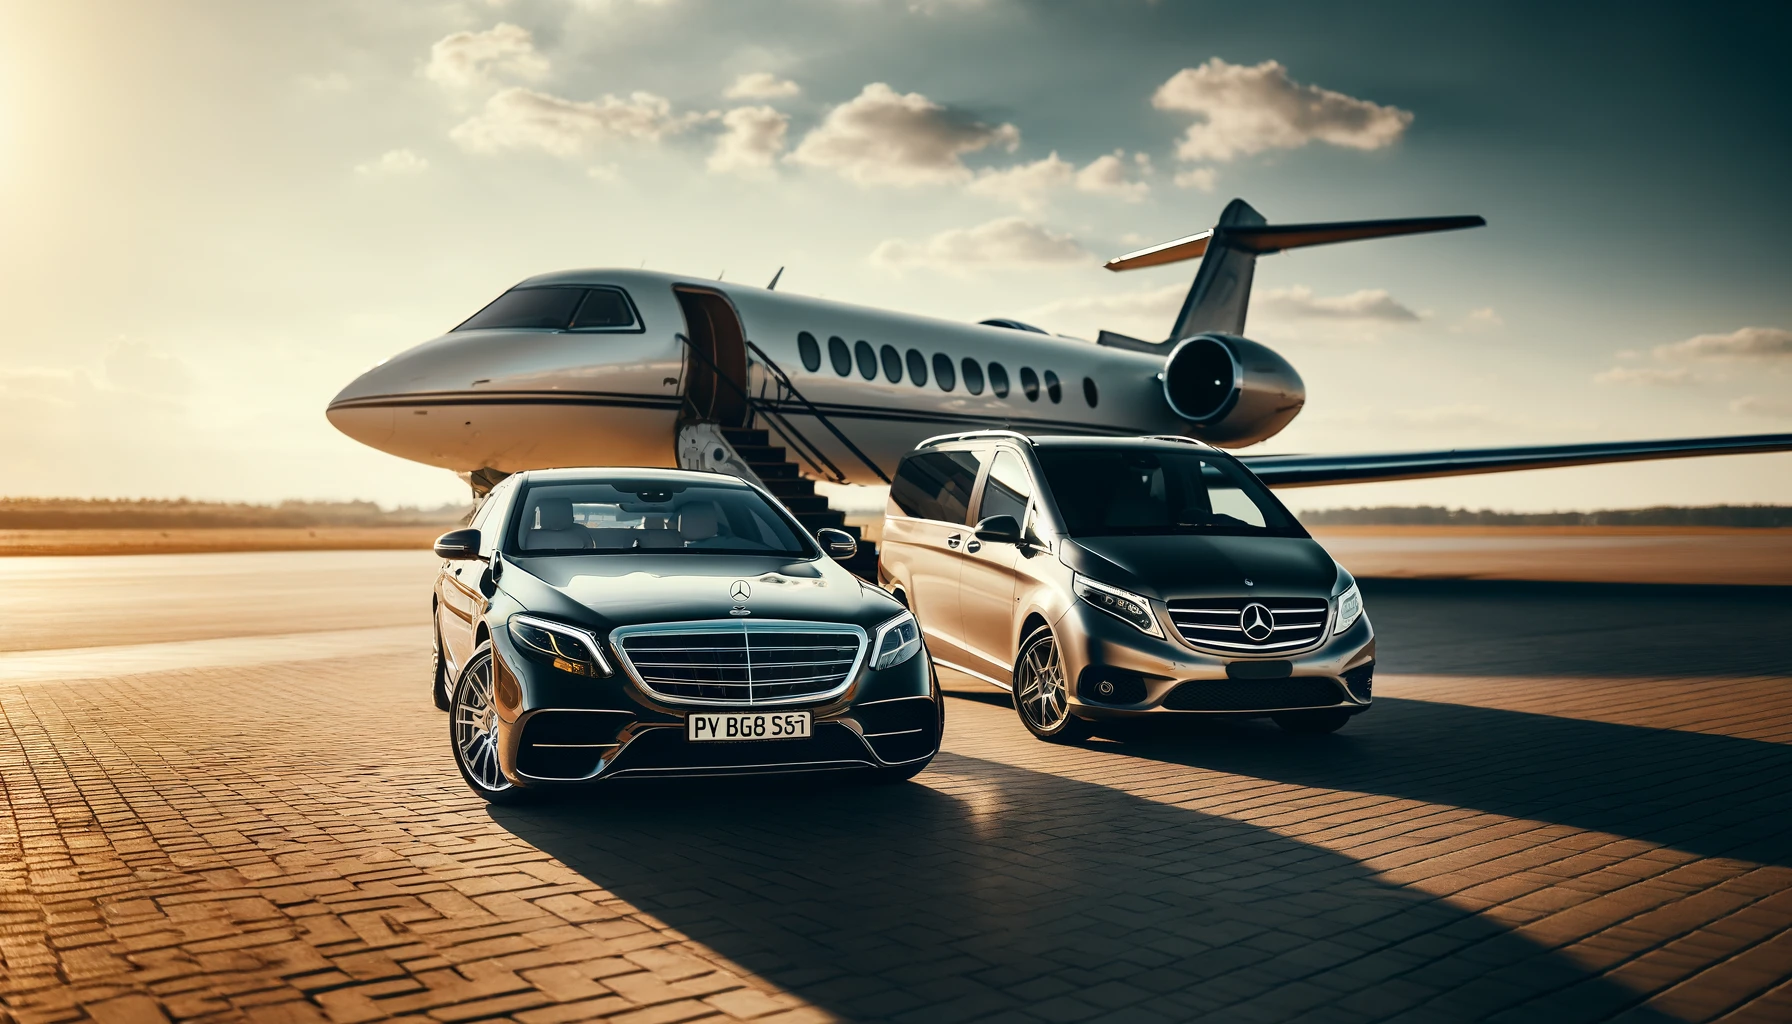 Luxury cars parked in front of a private jet on a sunny day